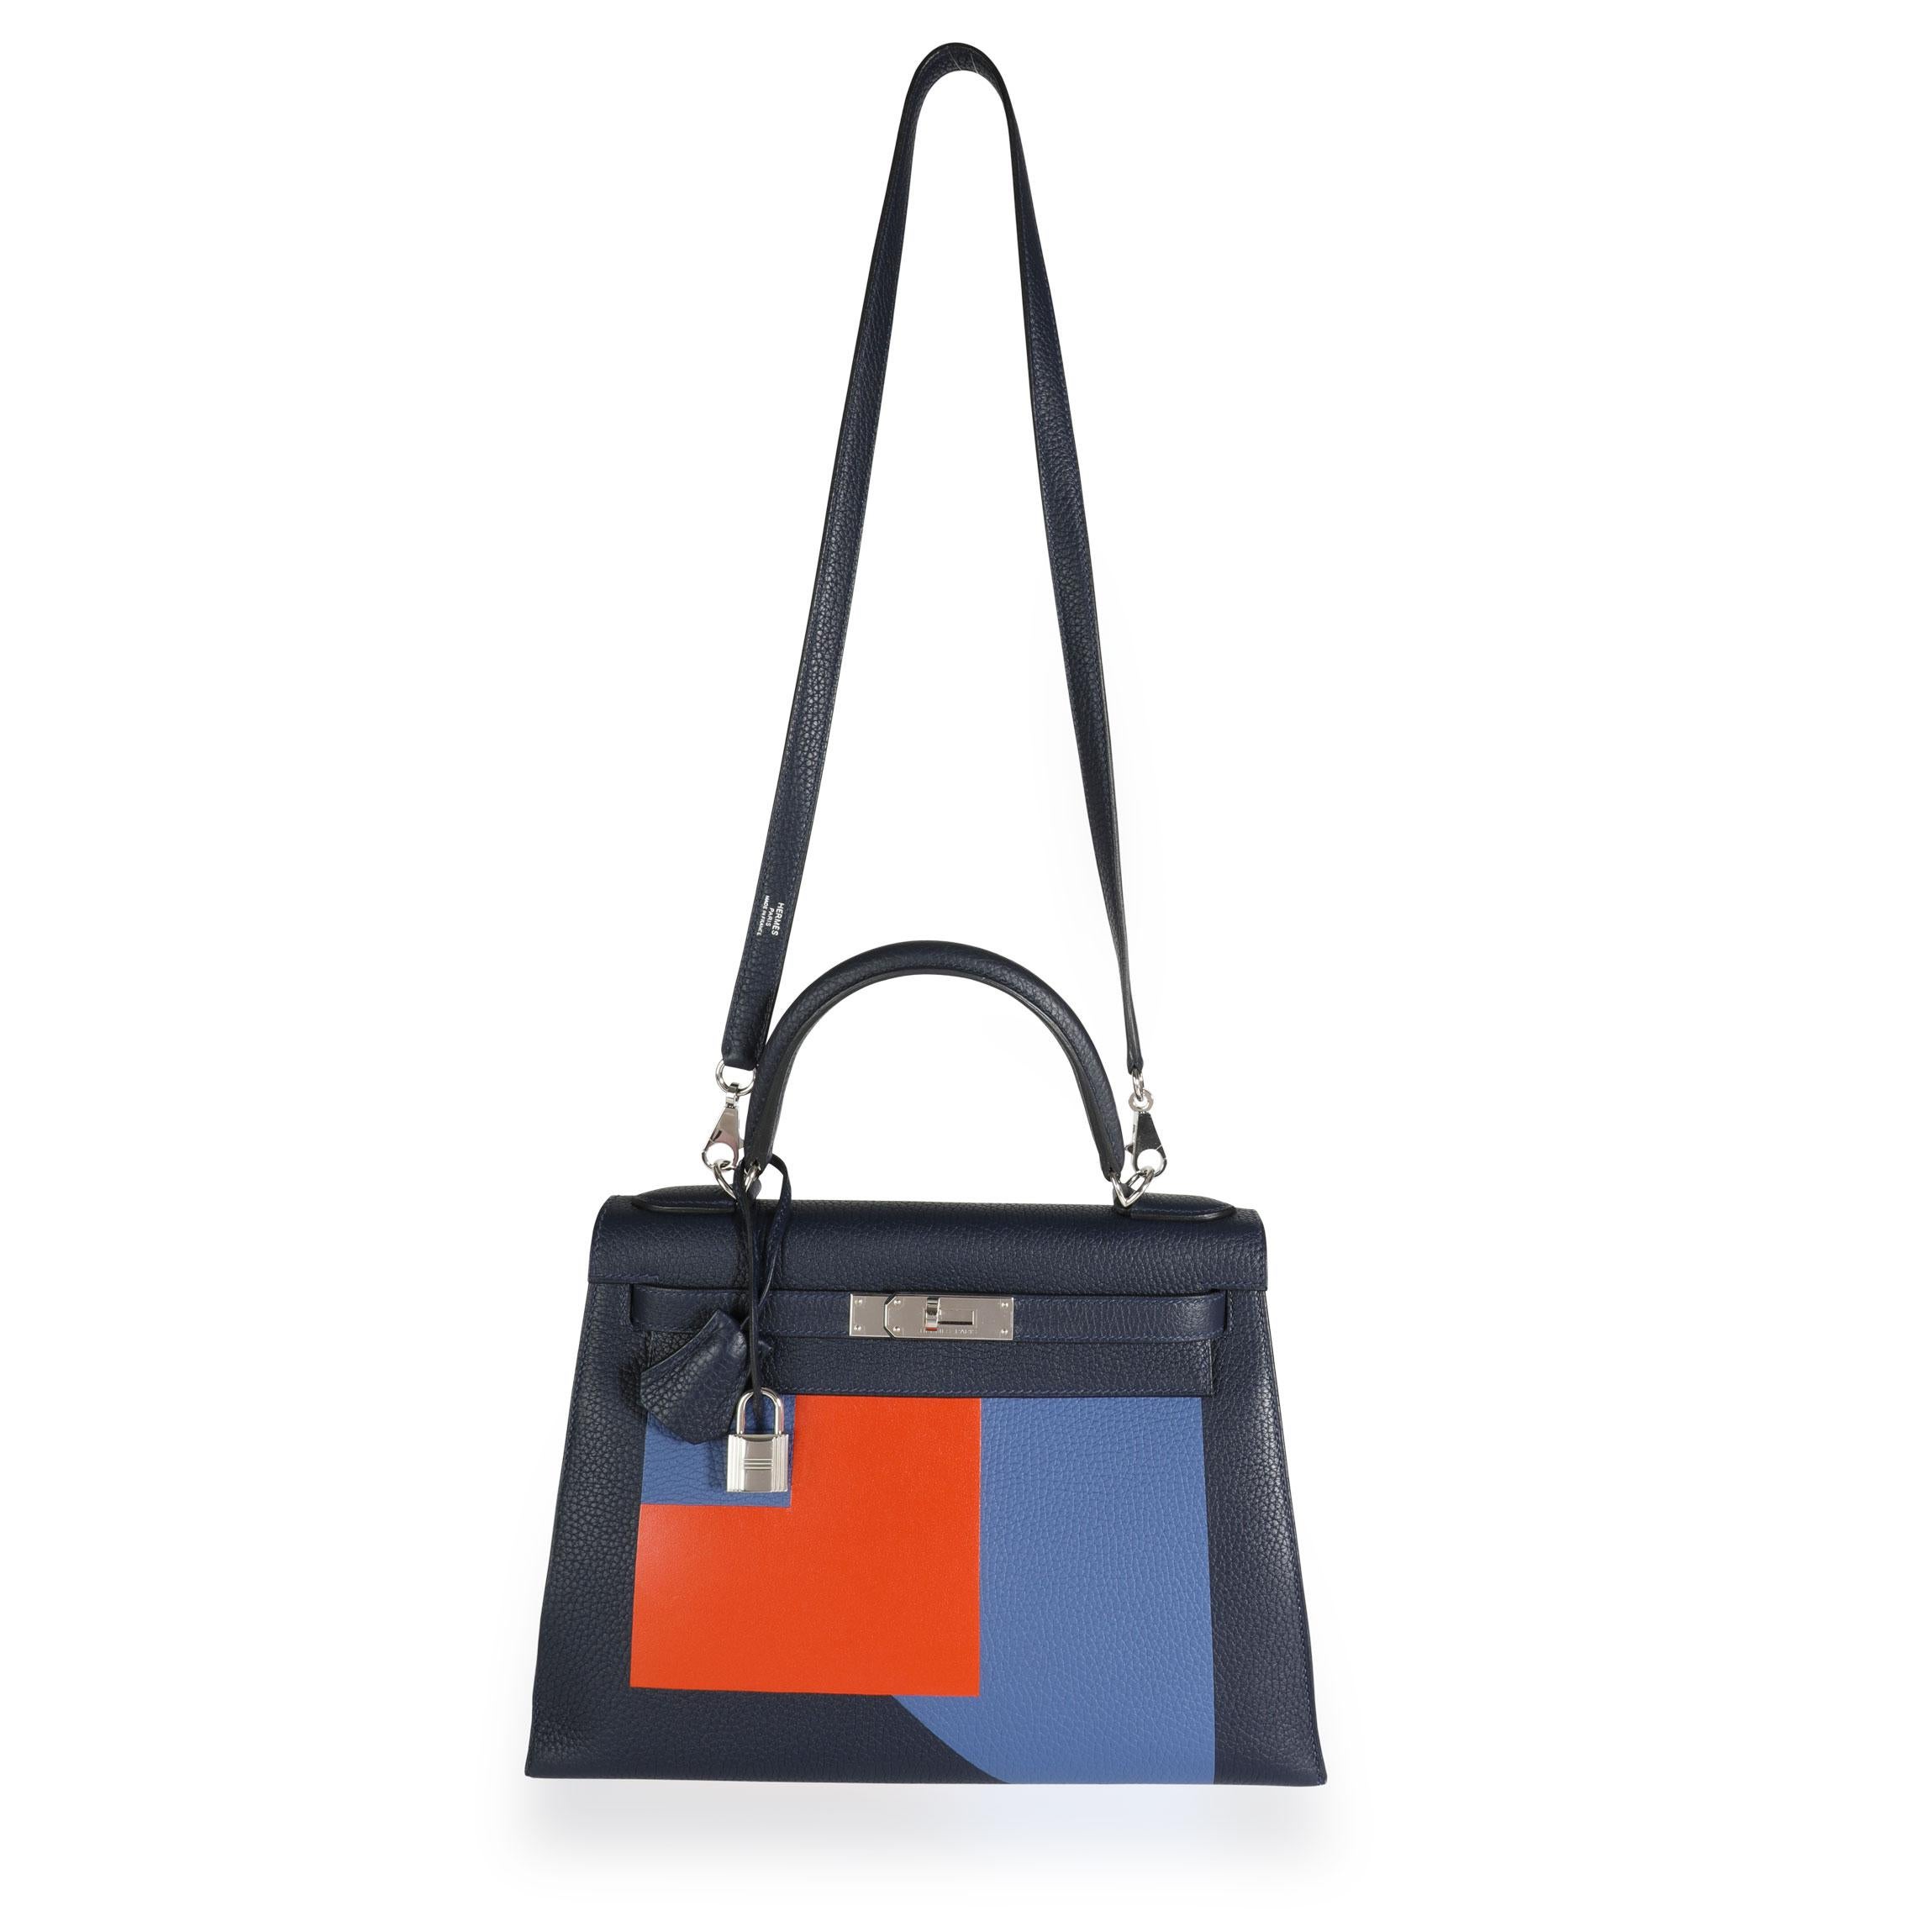 Hermès Limited Edition Kellygraphie Lettre R Sellier Kelly 28 PHW
SKU: 110838

Handbag Condition: Very Good
Condition Comments: Very Good Condition. Plastic on some hardware. Light scuffing to exterior. Scratching to feet.

Brand: Hermès
Model: